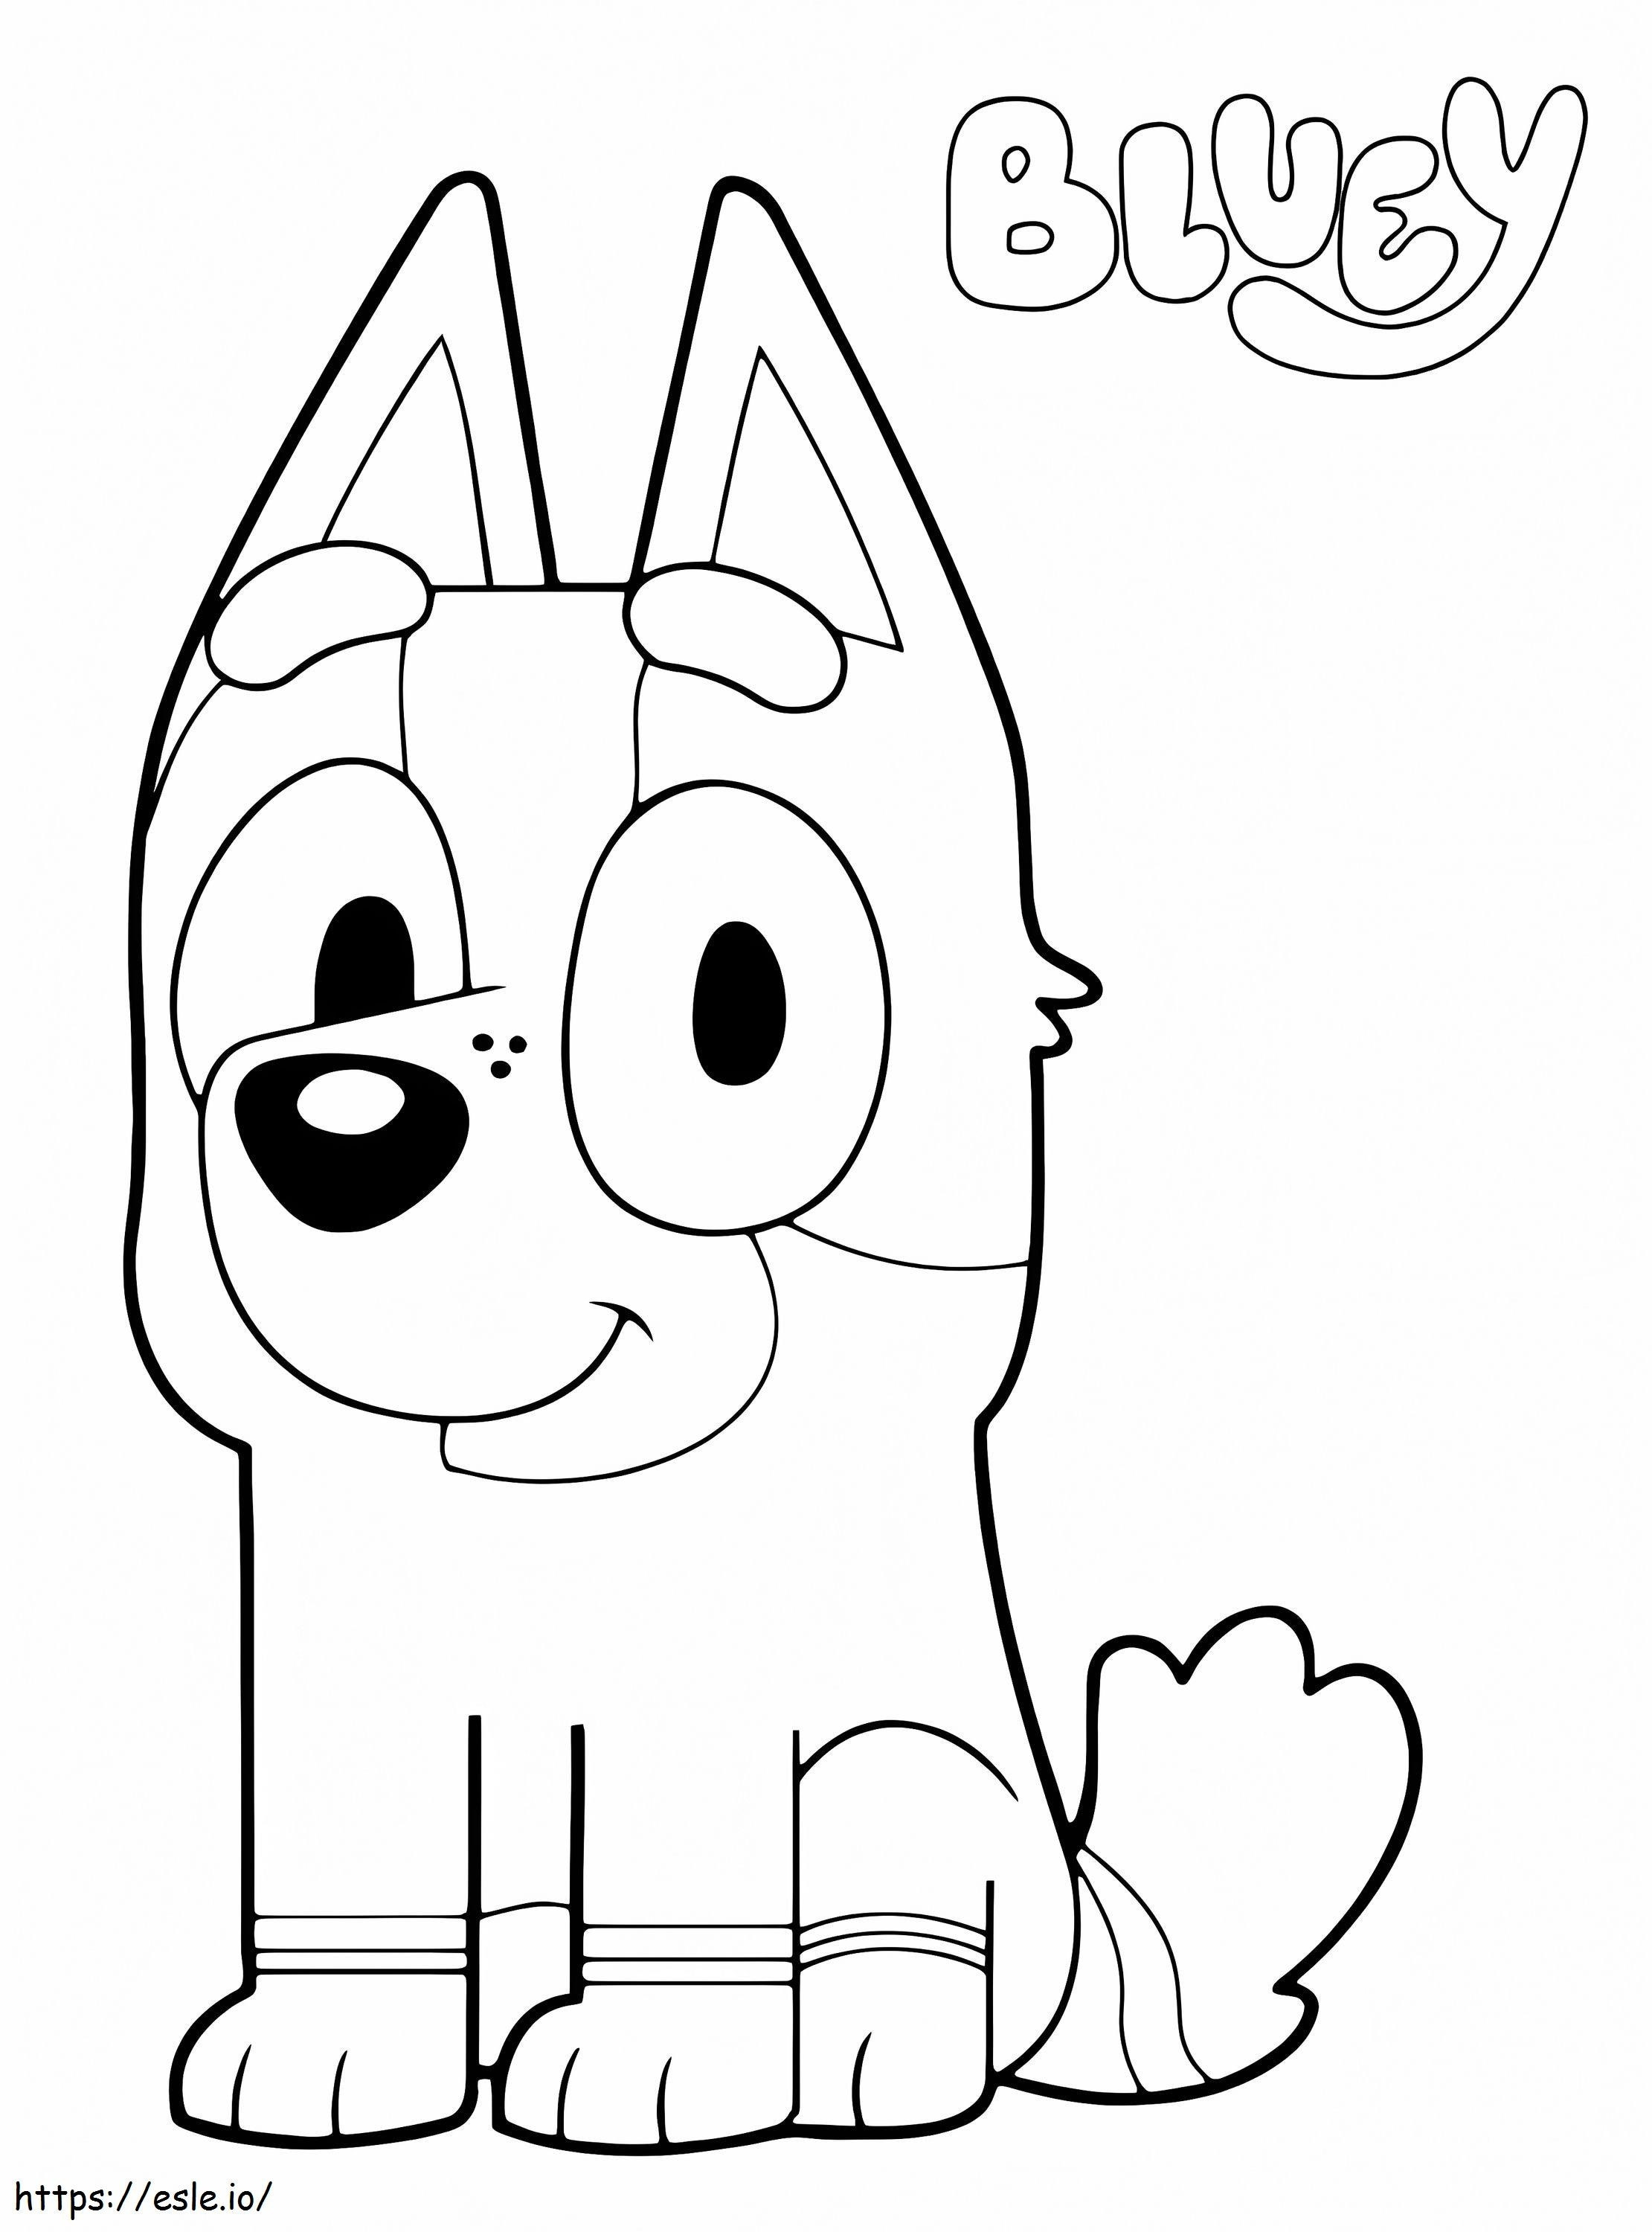 Socks From Bluey coloring page